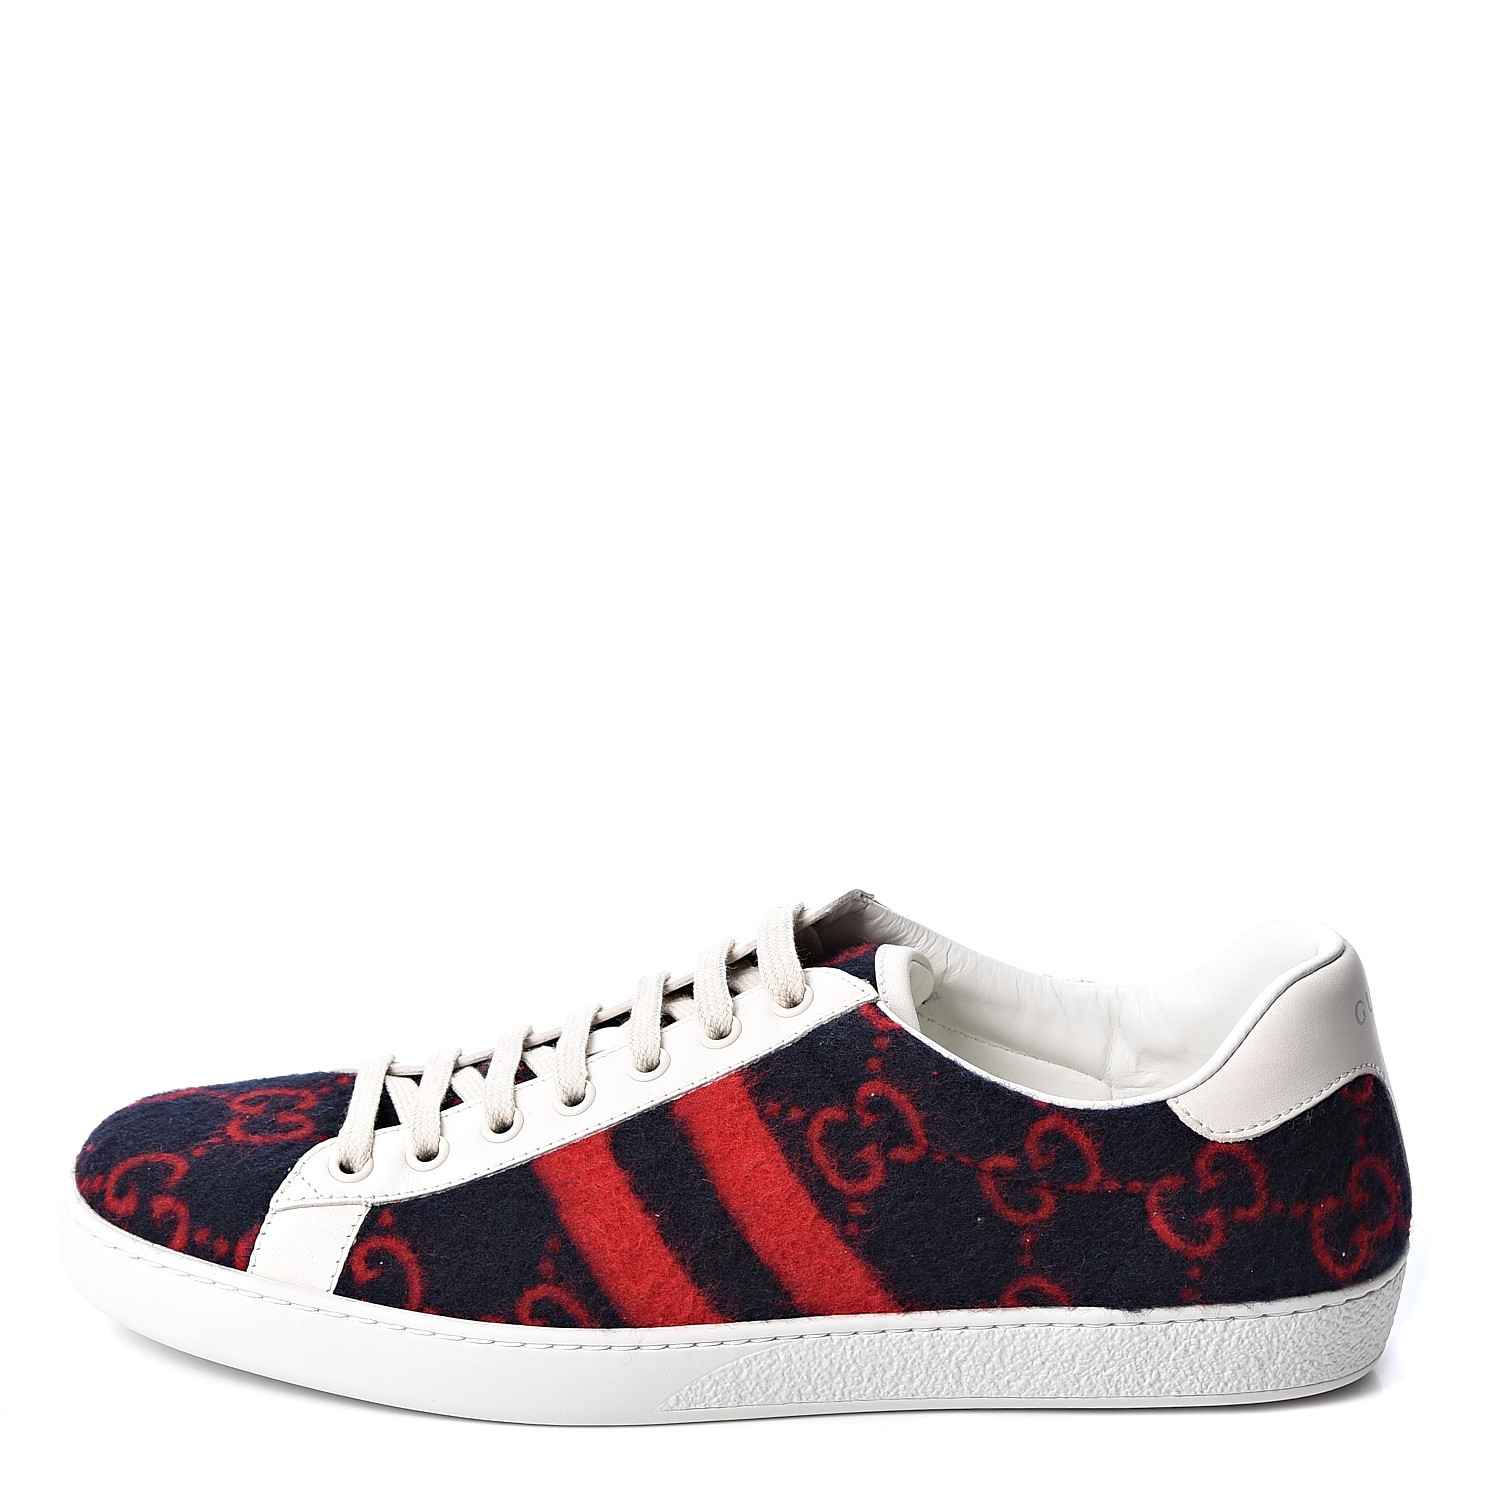 GUCCI Covered Wool Big GG Monogram Mens Sneaker 8.5 Blue Red 568713 ...